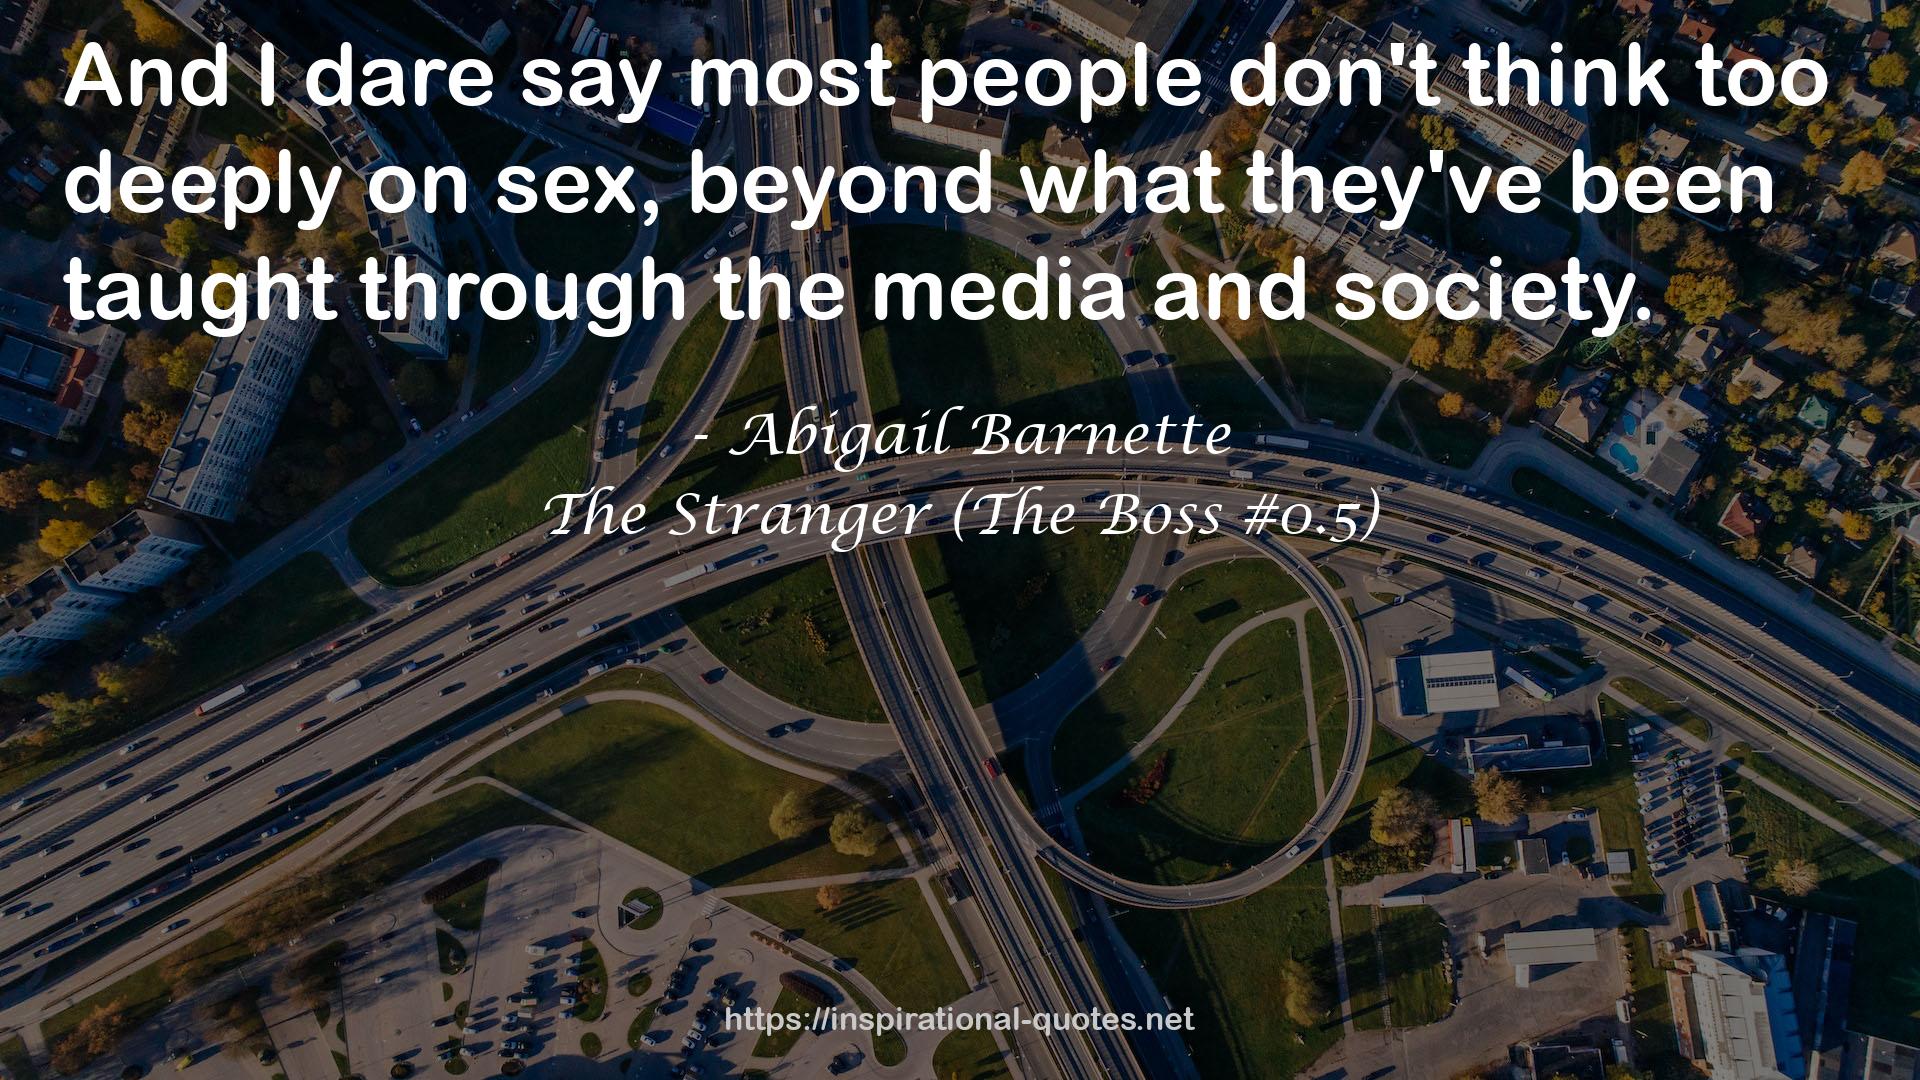 The Stranger (The Boss #0.5) QUOTES